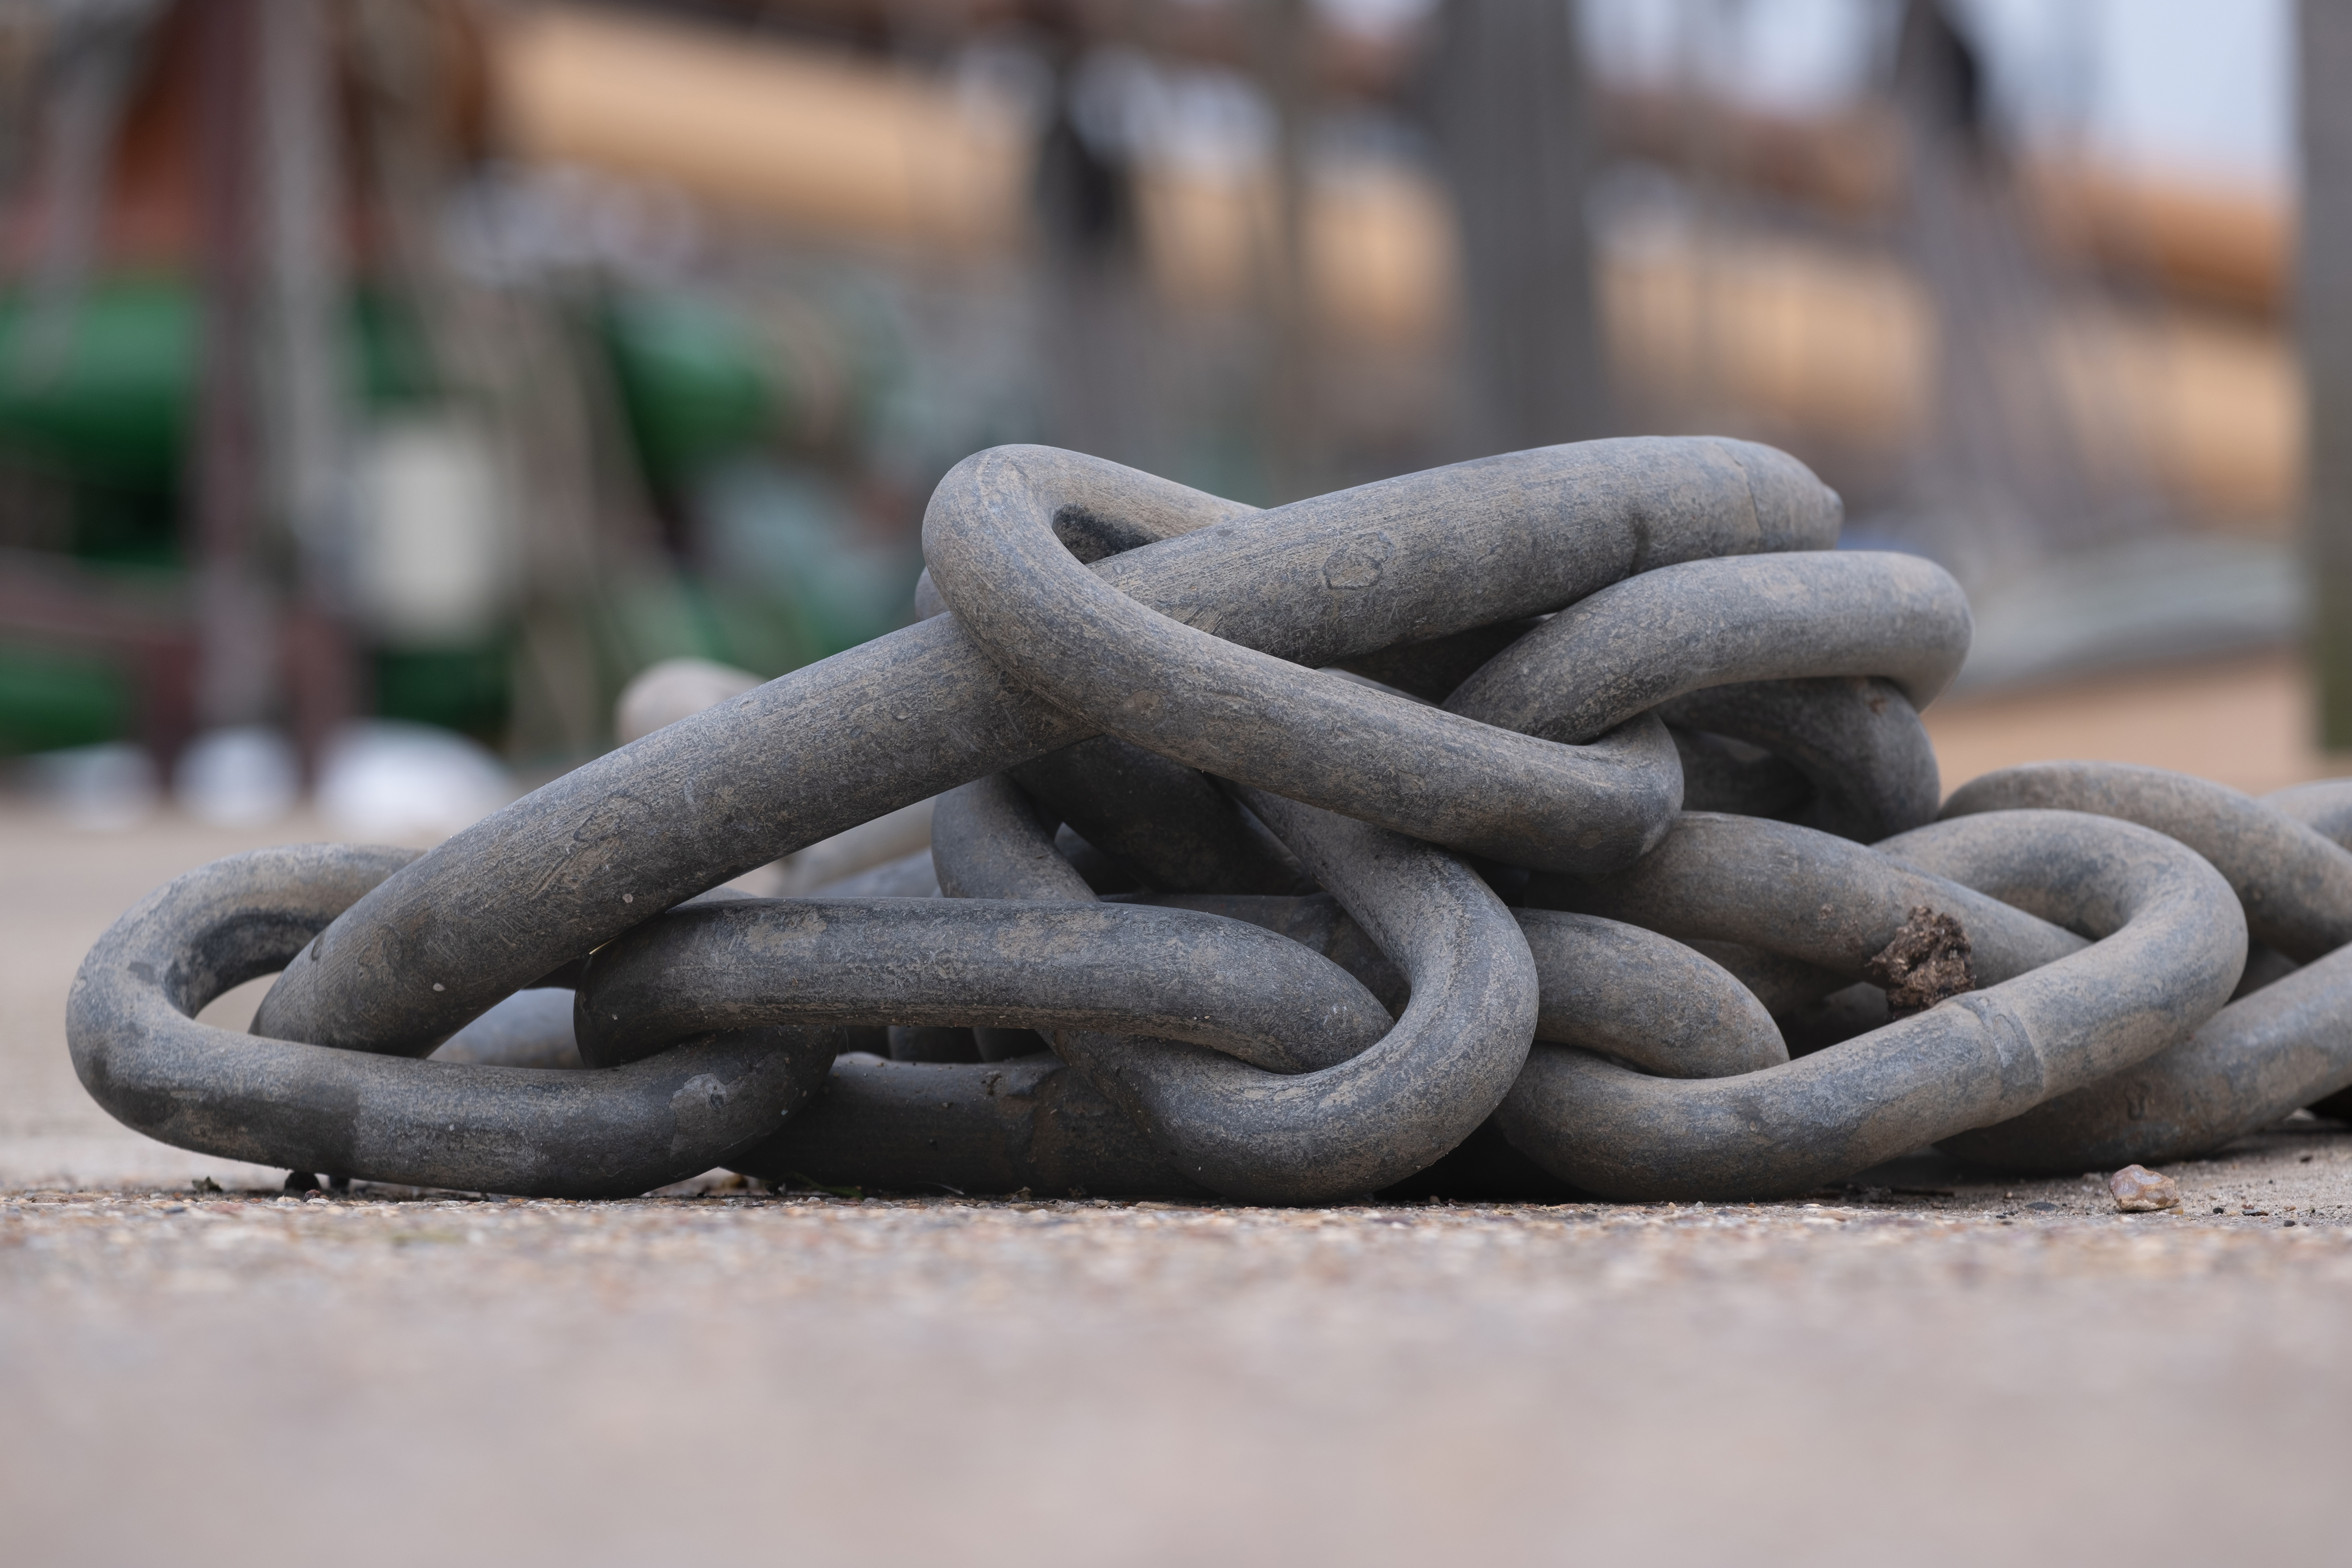 A large metal chain resting on the concrete ground